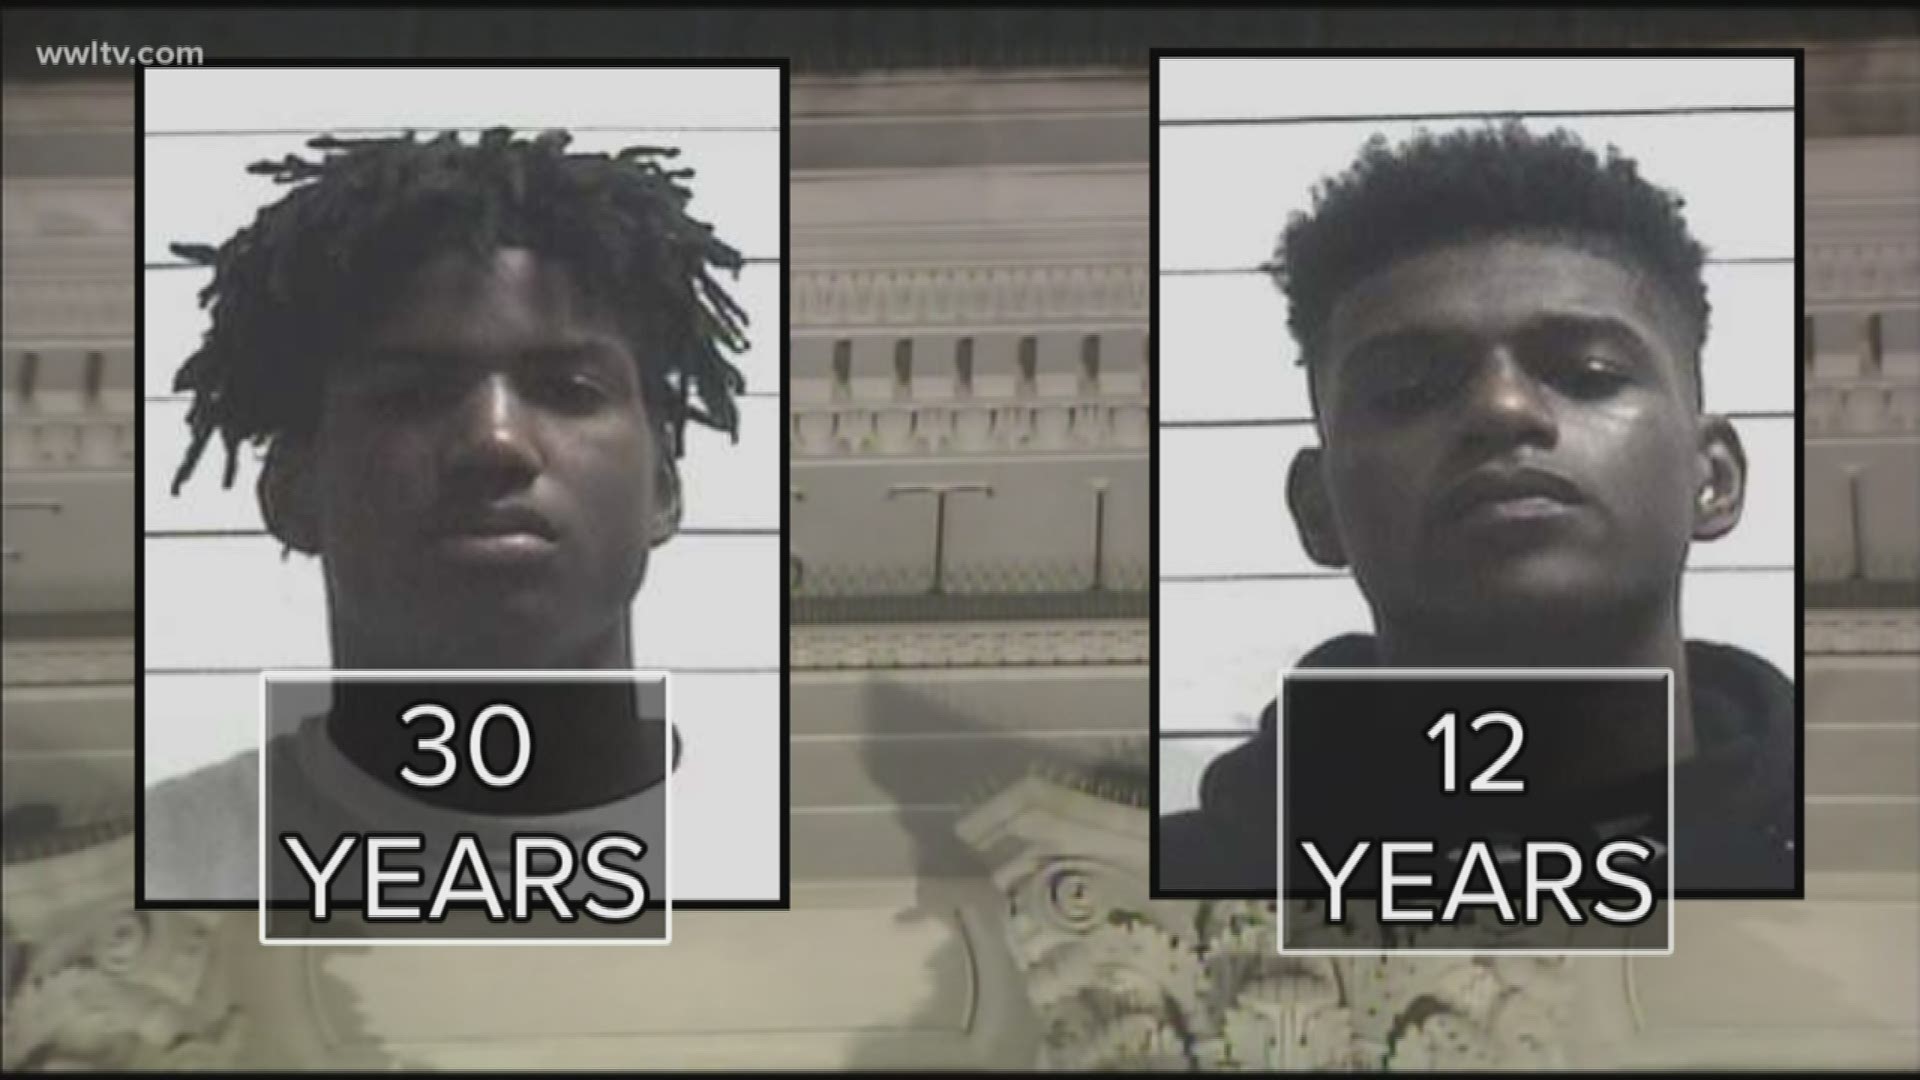 Robinson is expected to receive a 30-year sentence and Cottrell a 12-year sentence.